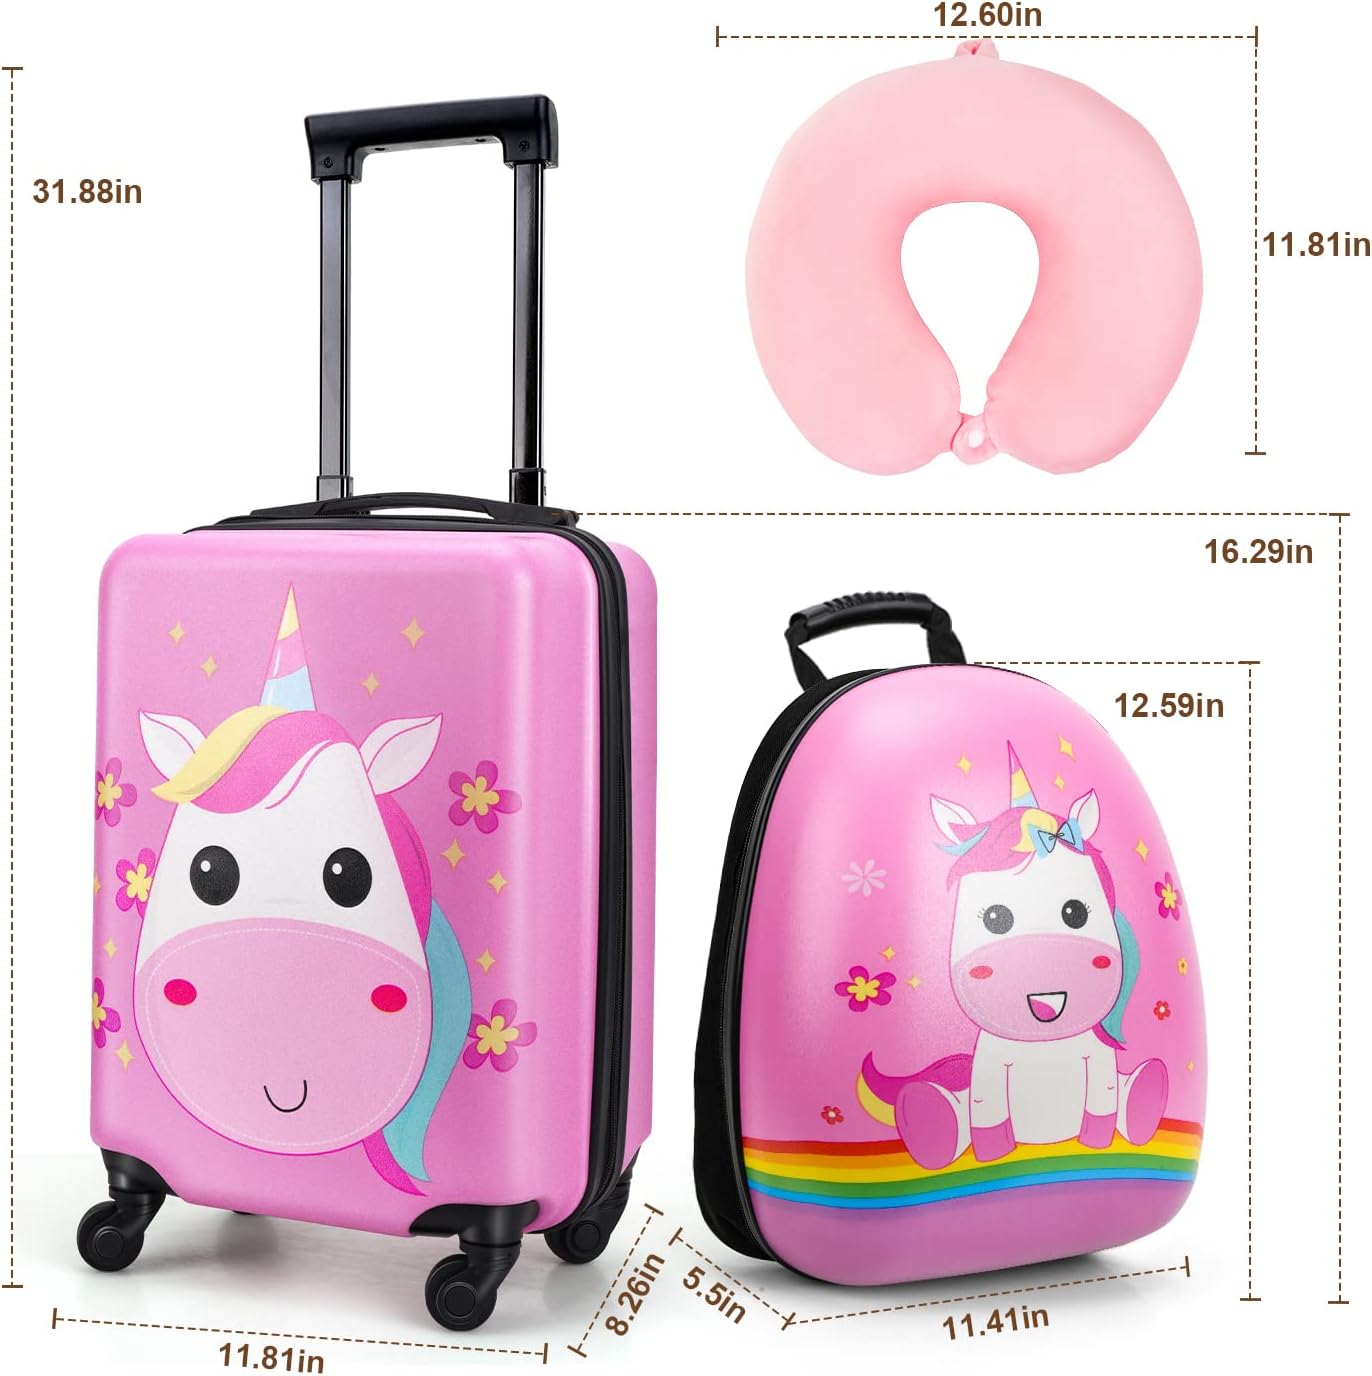 emissary Kids Luggage With Wheels For Girls, Unicorn Kids Luggage Set, Childrens Luggage For Girls With Wheels, Kids Suitcases With Wheels For Girl, Toddler Suitcase For Girls, Travel Luggage For Kids